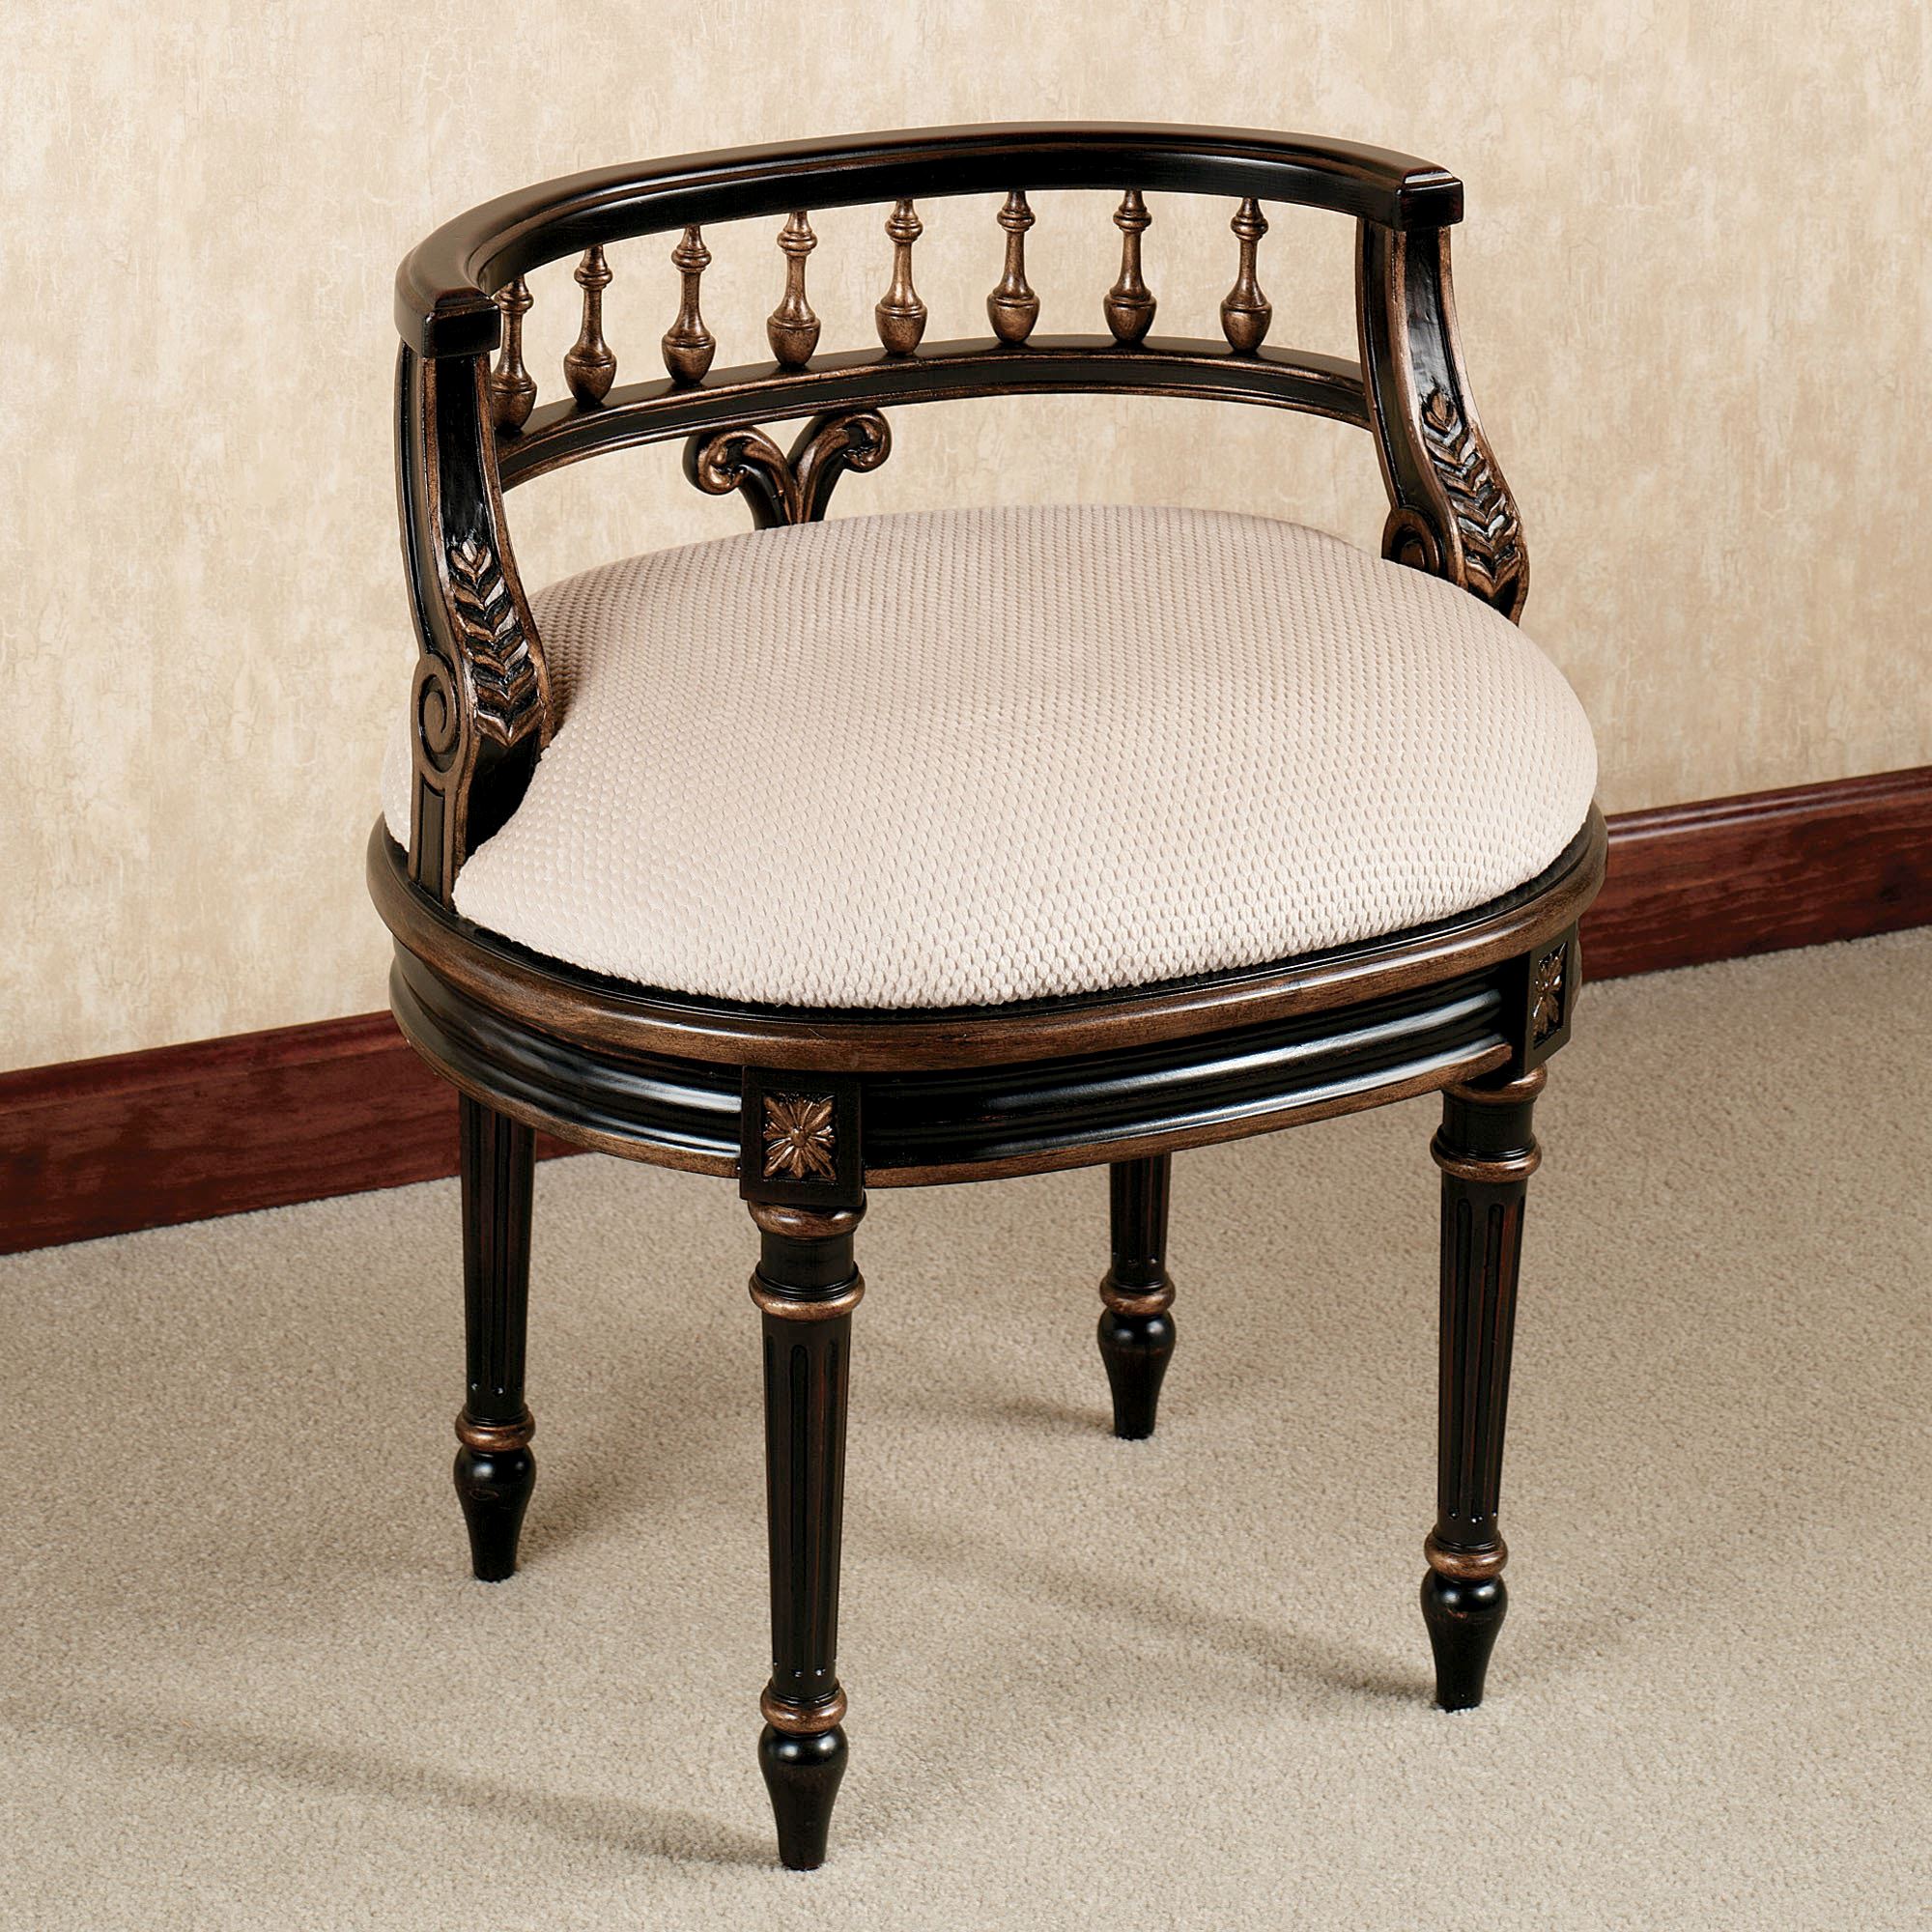 queensley vanity chair black walnut. click to expand YYVATFP